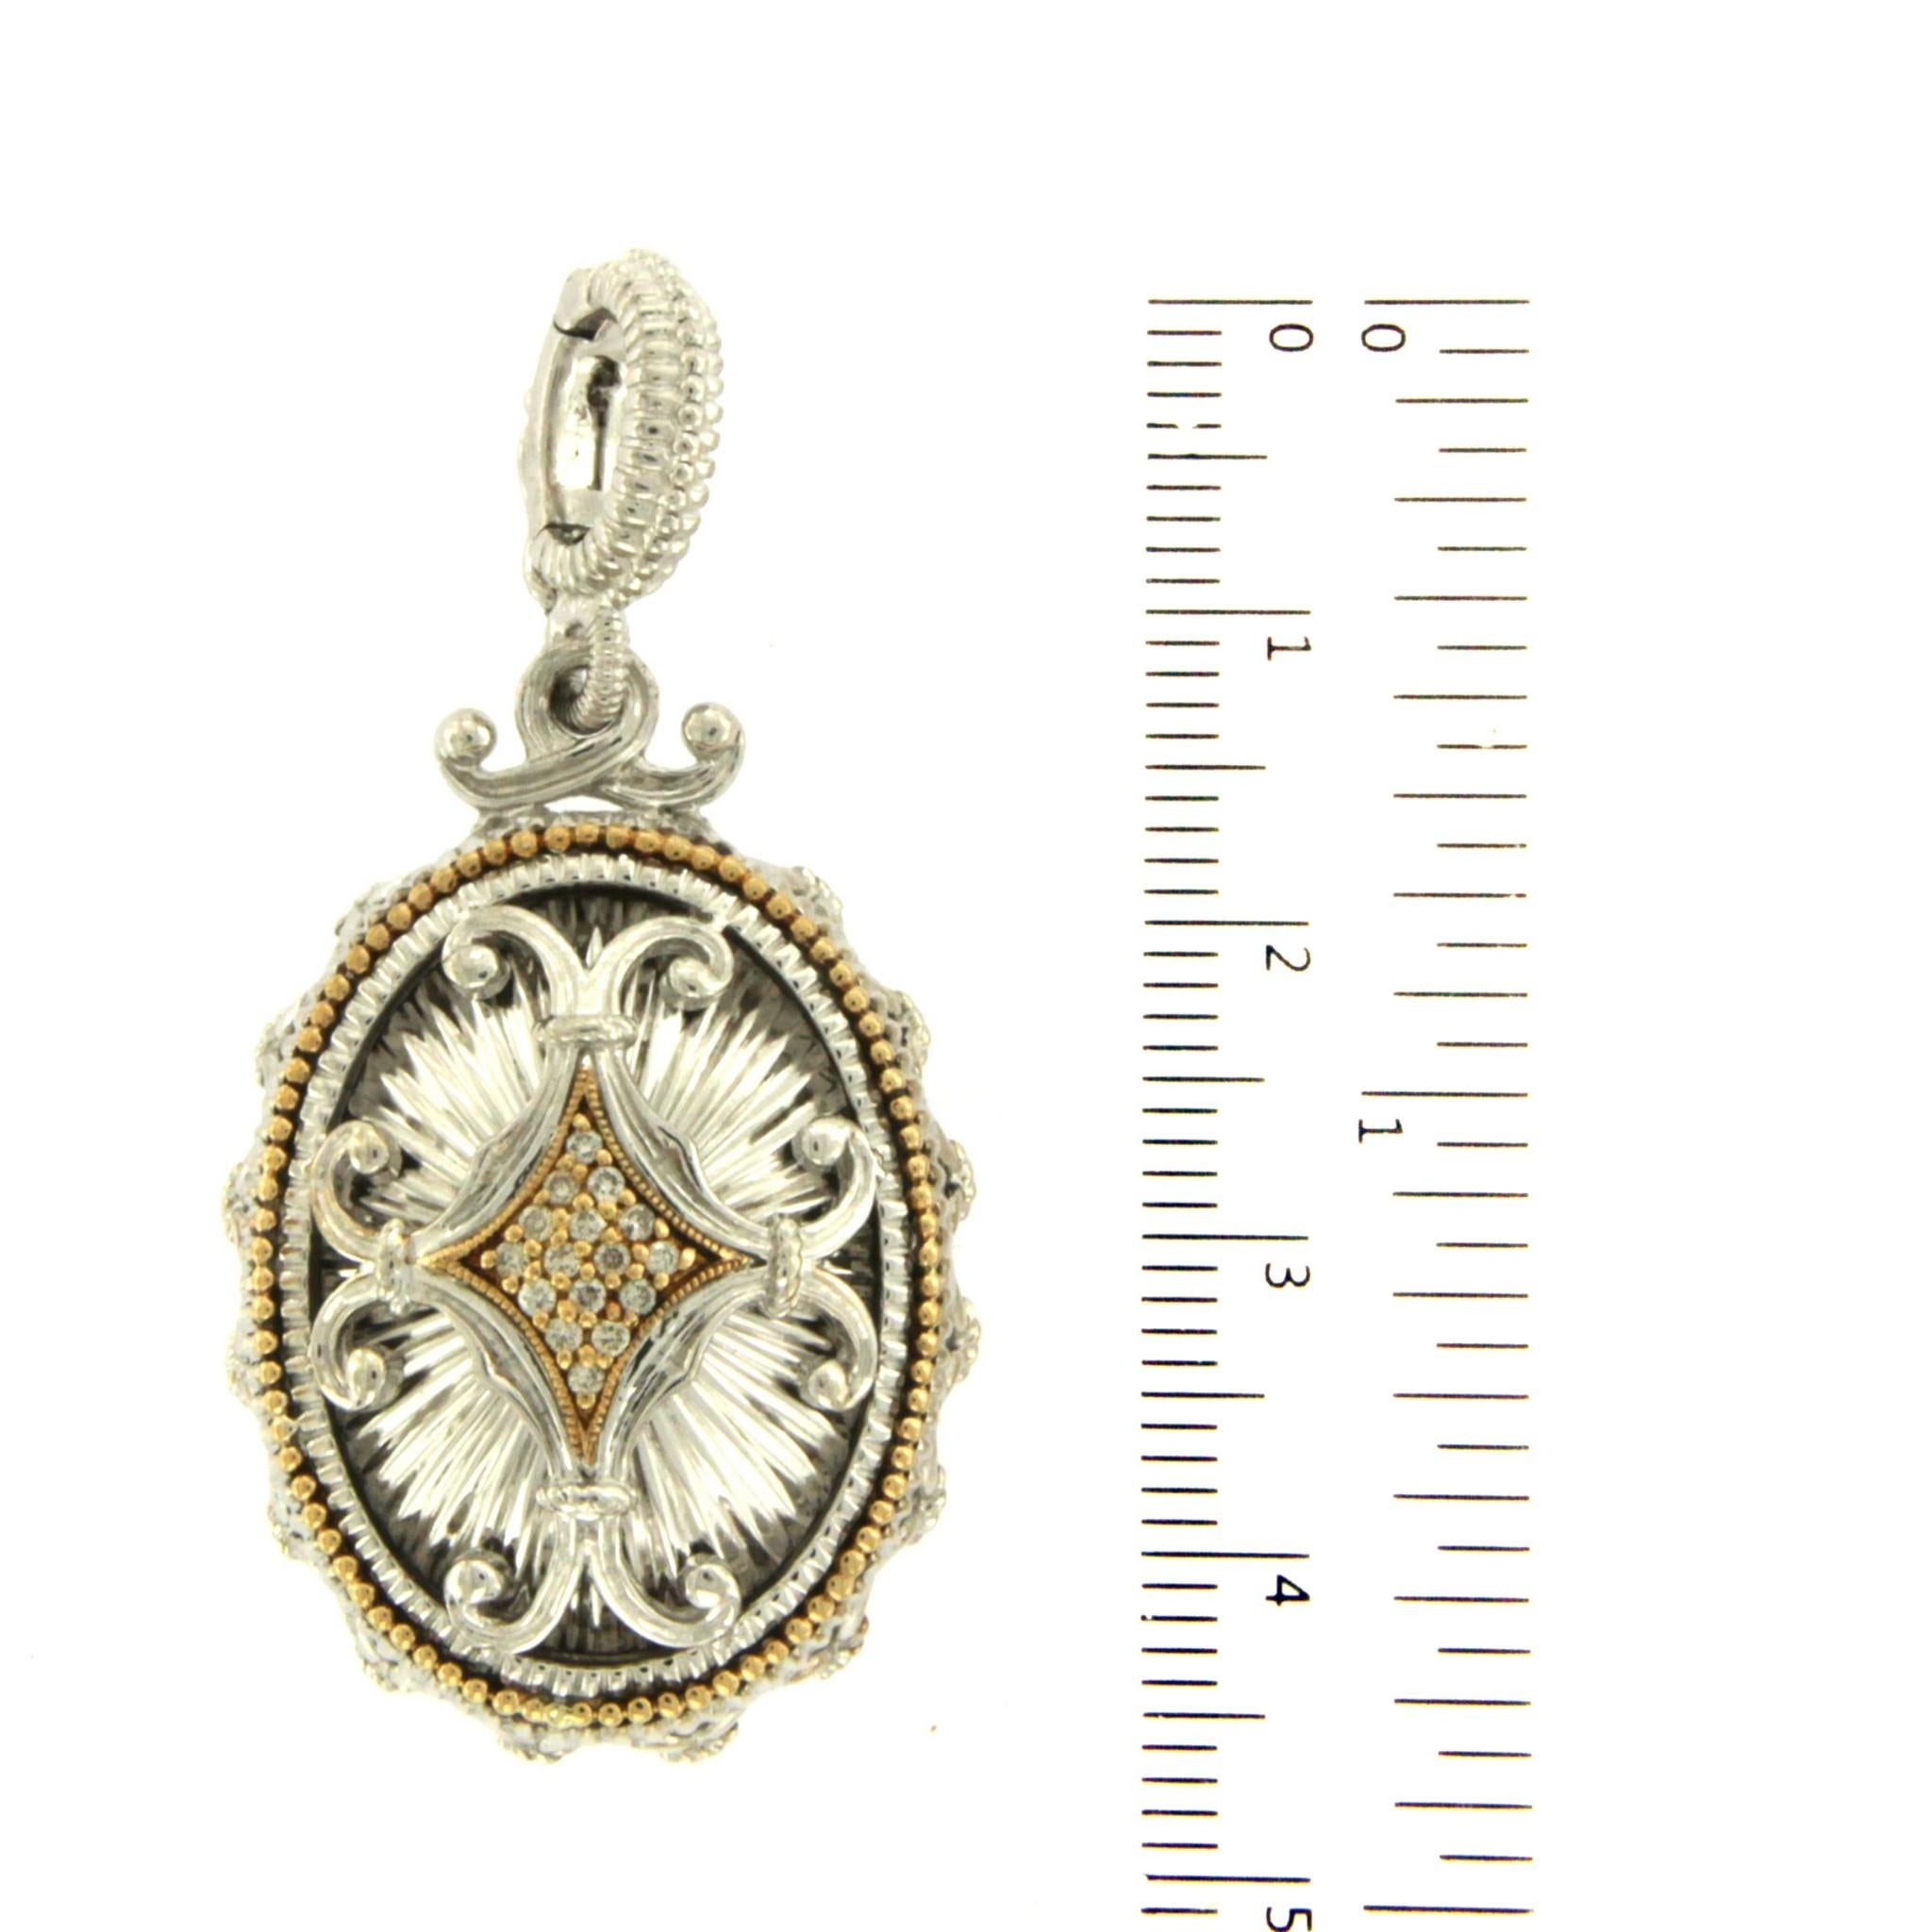 Height: 46.5 mm
Width: 24 mm
Metal: 925 Sterling Silver
Stone Type: Diamonds
Hallmark: Gabriel & Co. 18K 925
Total Weight: 16.4 Grams
Condition: Pre Owned
Estimated Retail Price: $550
Stock Number: U14